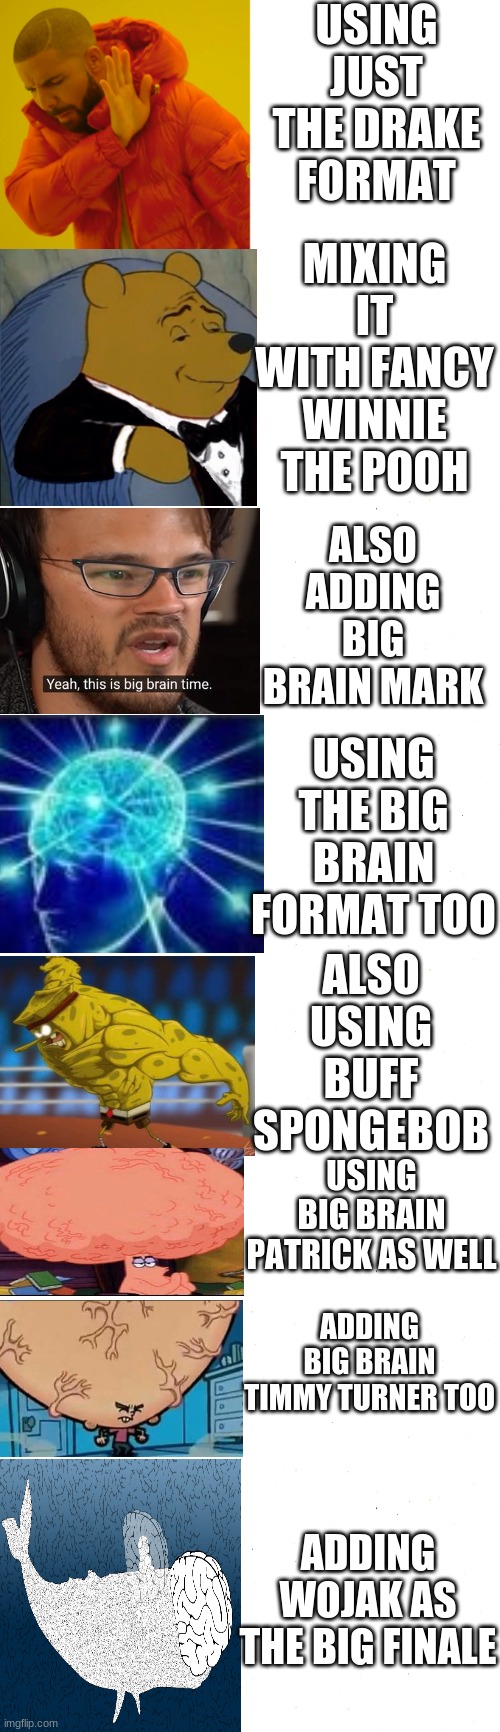 THE BIGGEST BRAIN MEGA MEME | USING JUST THE DRAKE FORMAT; MIXING IT WITH FANCY WINNIE THE POOH; ALSO ADDING BIG BRAIN MARK; USING THE BIG BRAIN FORMAT TOO; ALSO USING BUFF SPONGEBOB; USING BIG BRAIN PATRICK AS WELL; ADDING BIG BRAIN TIMMY TURNER TOO; ADDING WOJAK AS THE BIG FINALE | image tagged in memes,drake hotline bling,big brain,tuxedo winnie the pooh,buff spongebob,big brain wojak | made w/ Imgflip meme maker